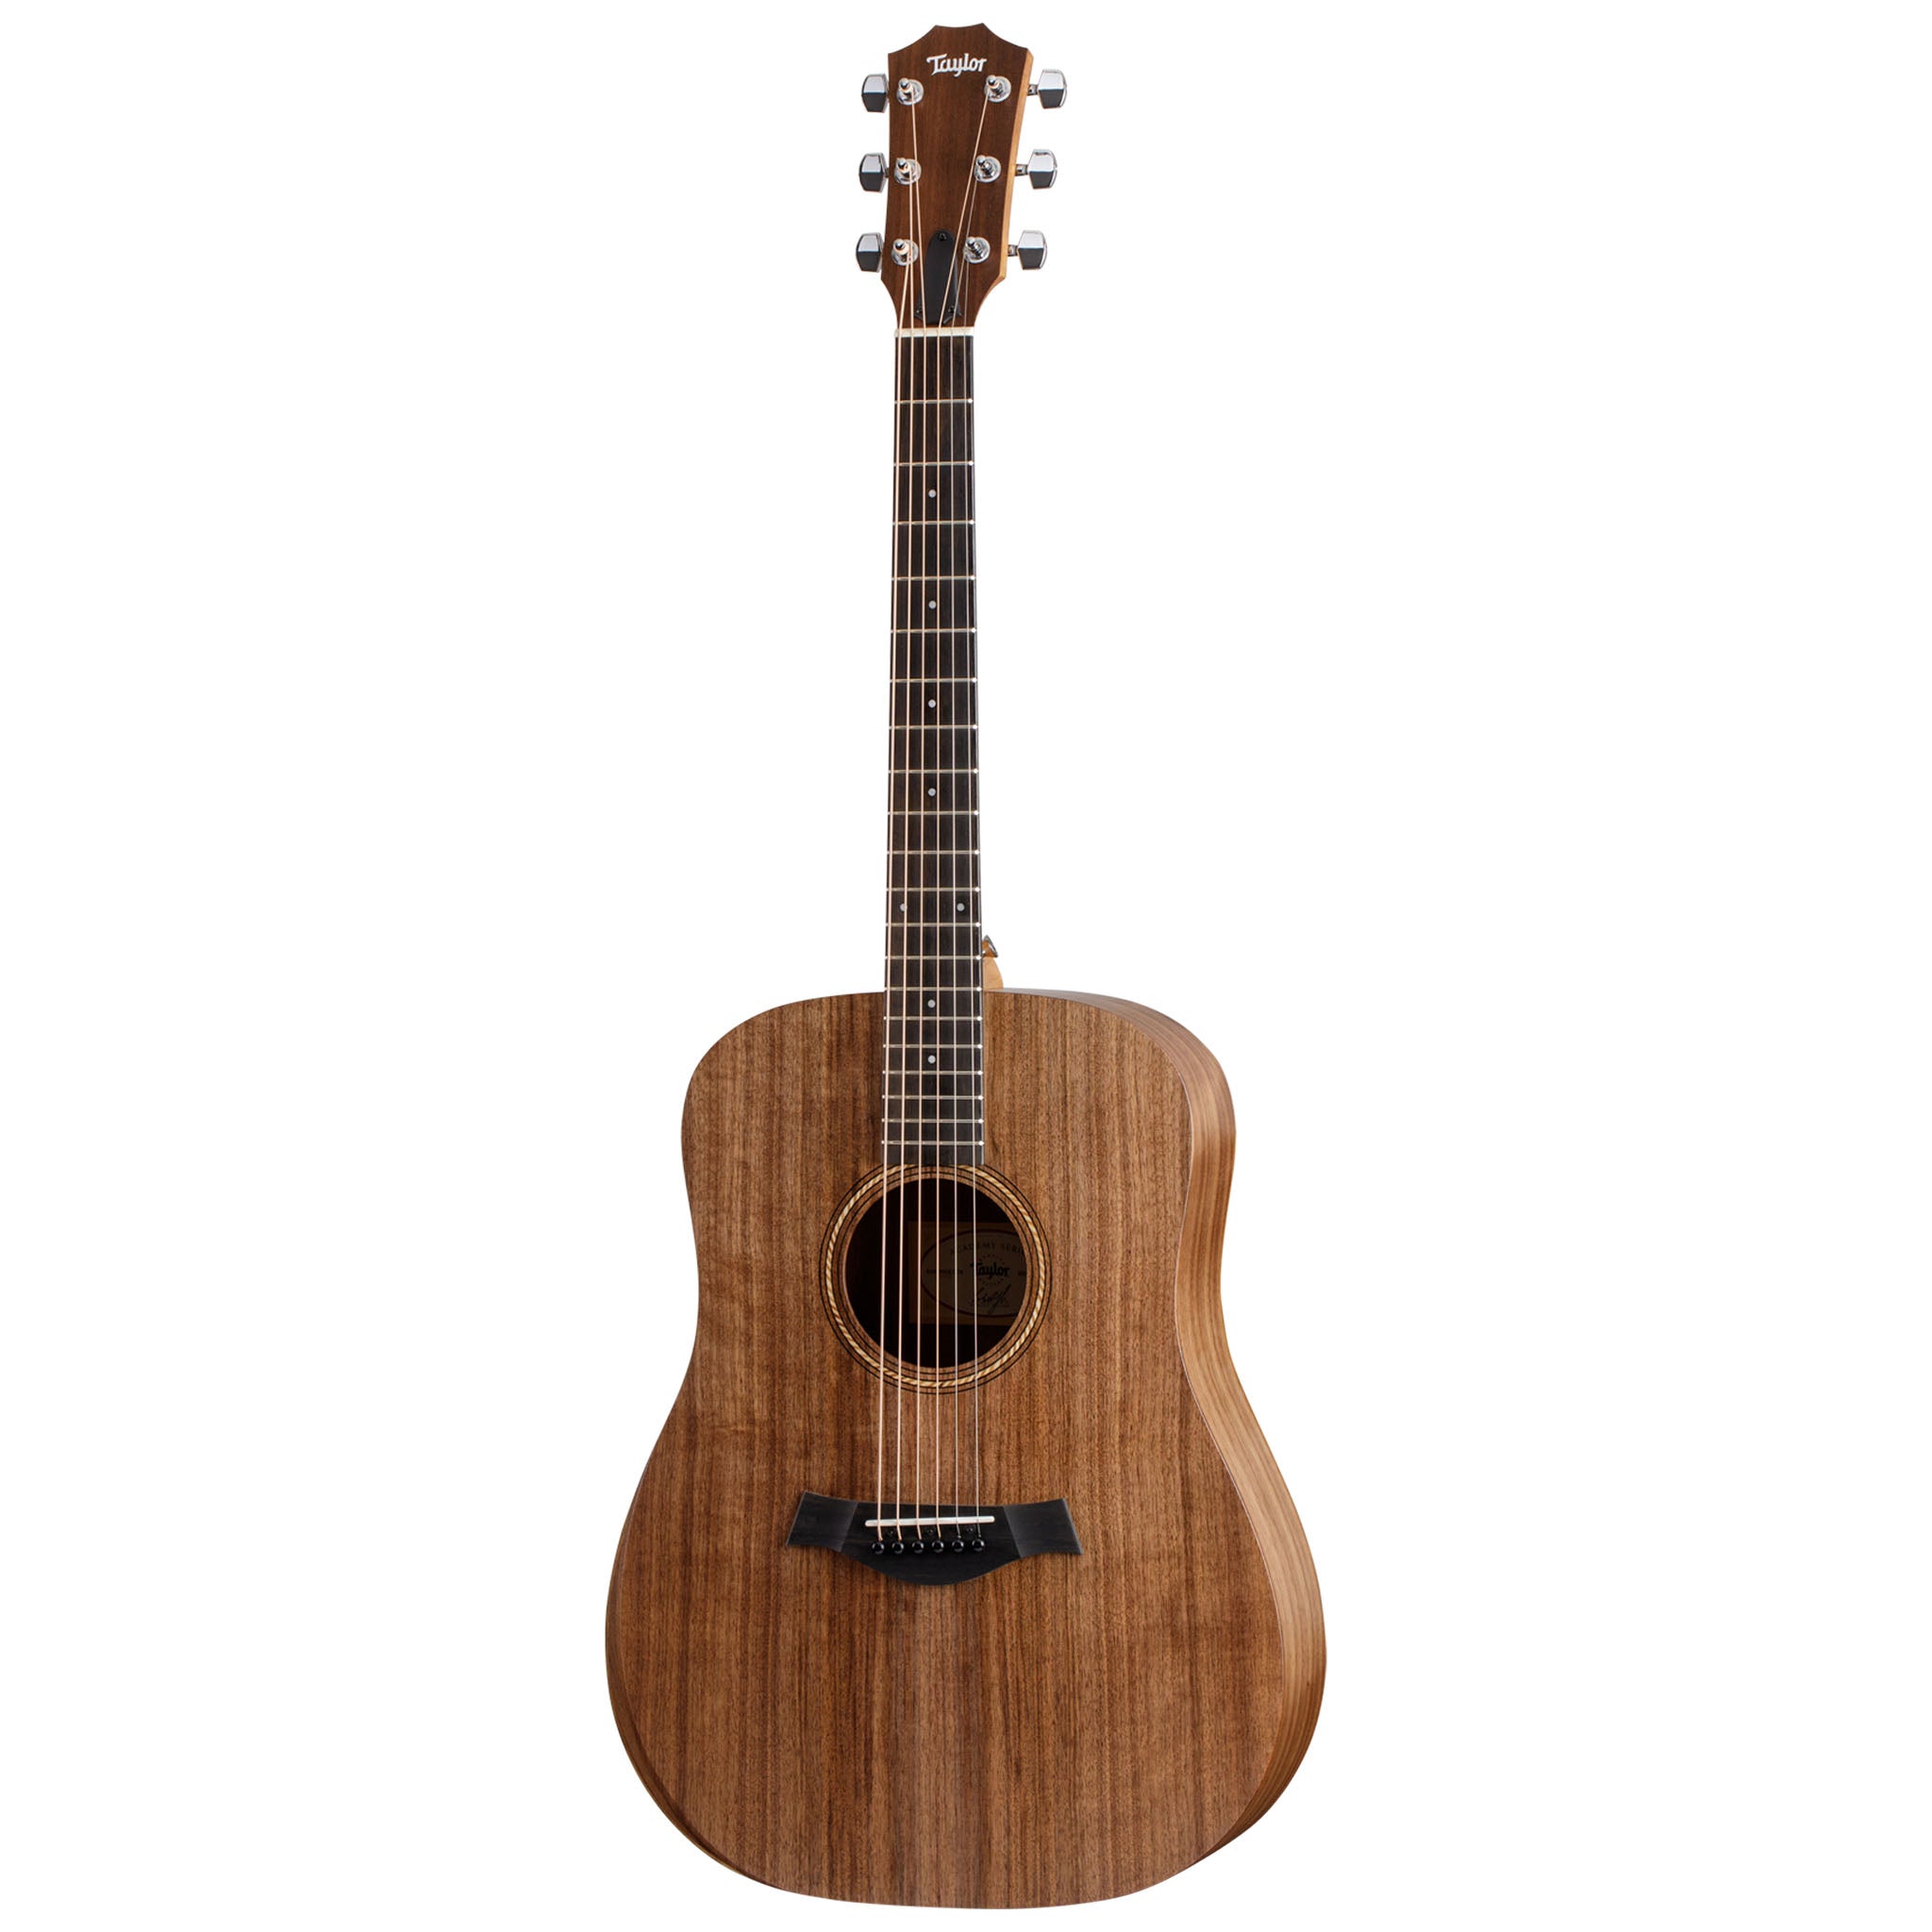 Taylor Quality Guitars available at Fiddlershop